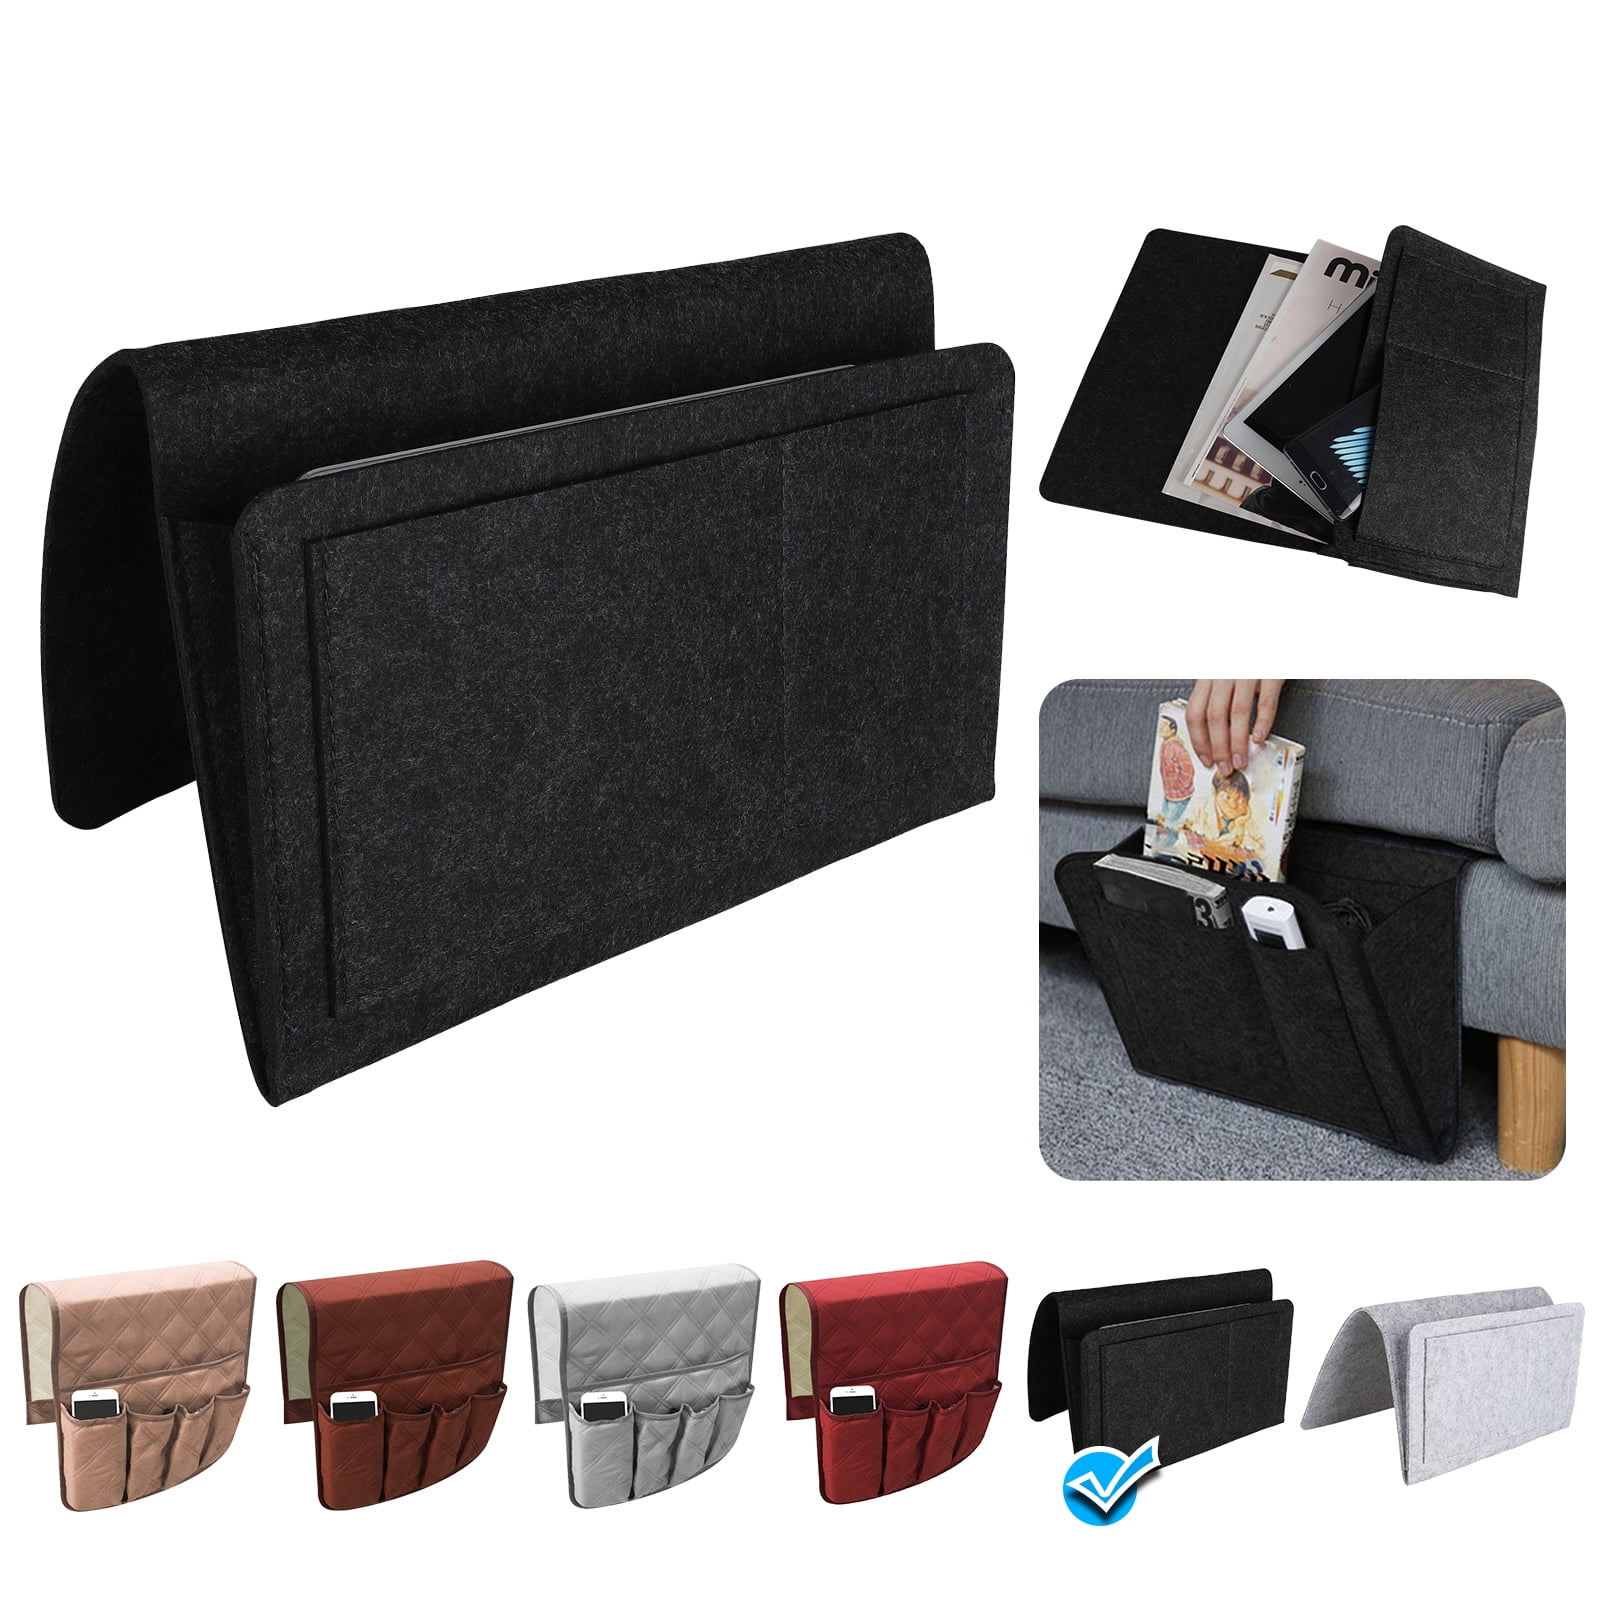 Sofa Arm Rest Hanging Bags Sofa Caddy Storage Bag Organiser TV Remote Control Holder Armchairs Couch Organiser Phone Pouch Chair Tidy Table Space Saver Pocket 